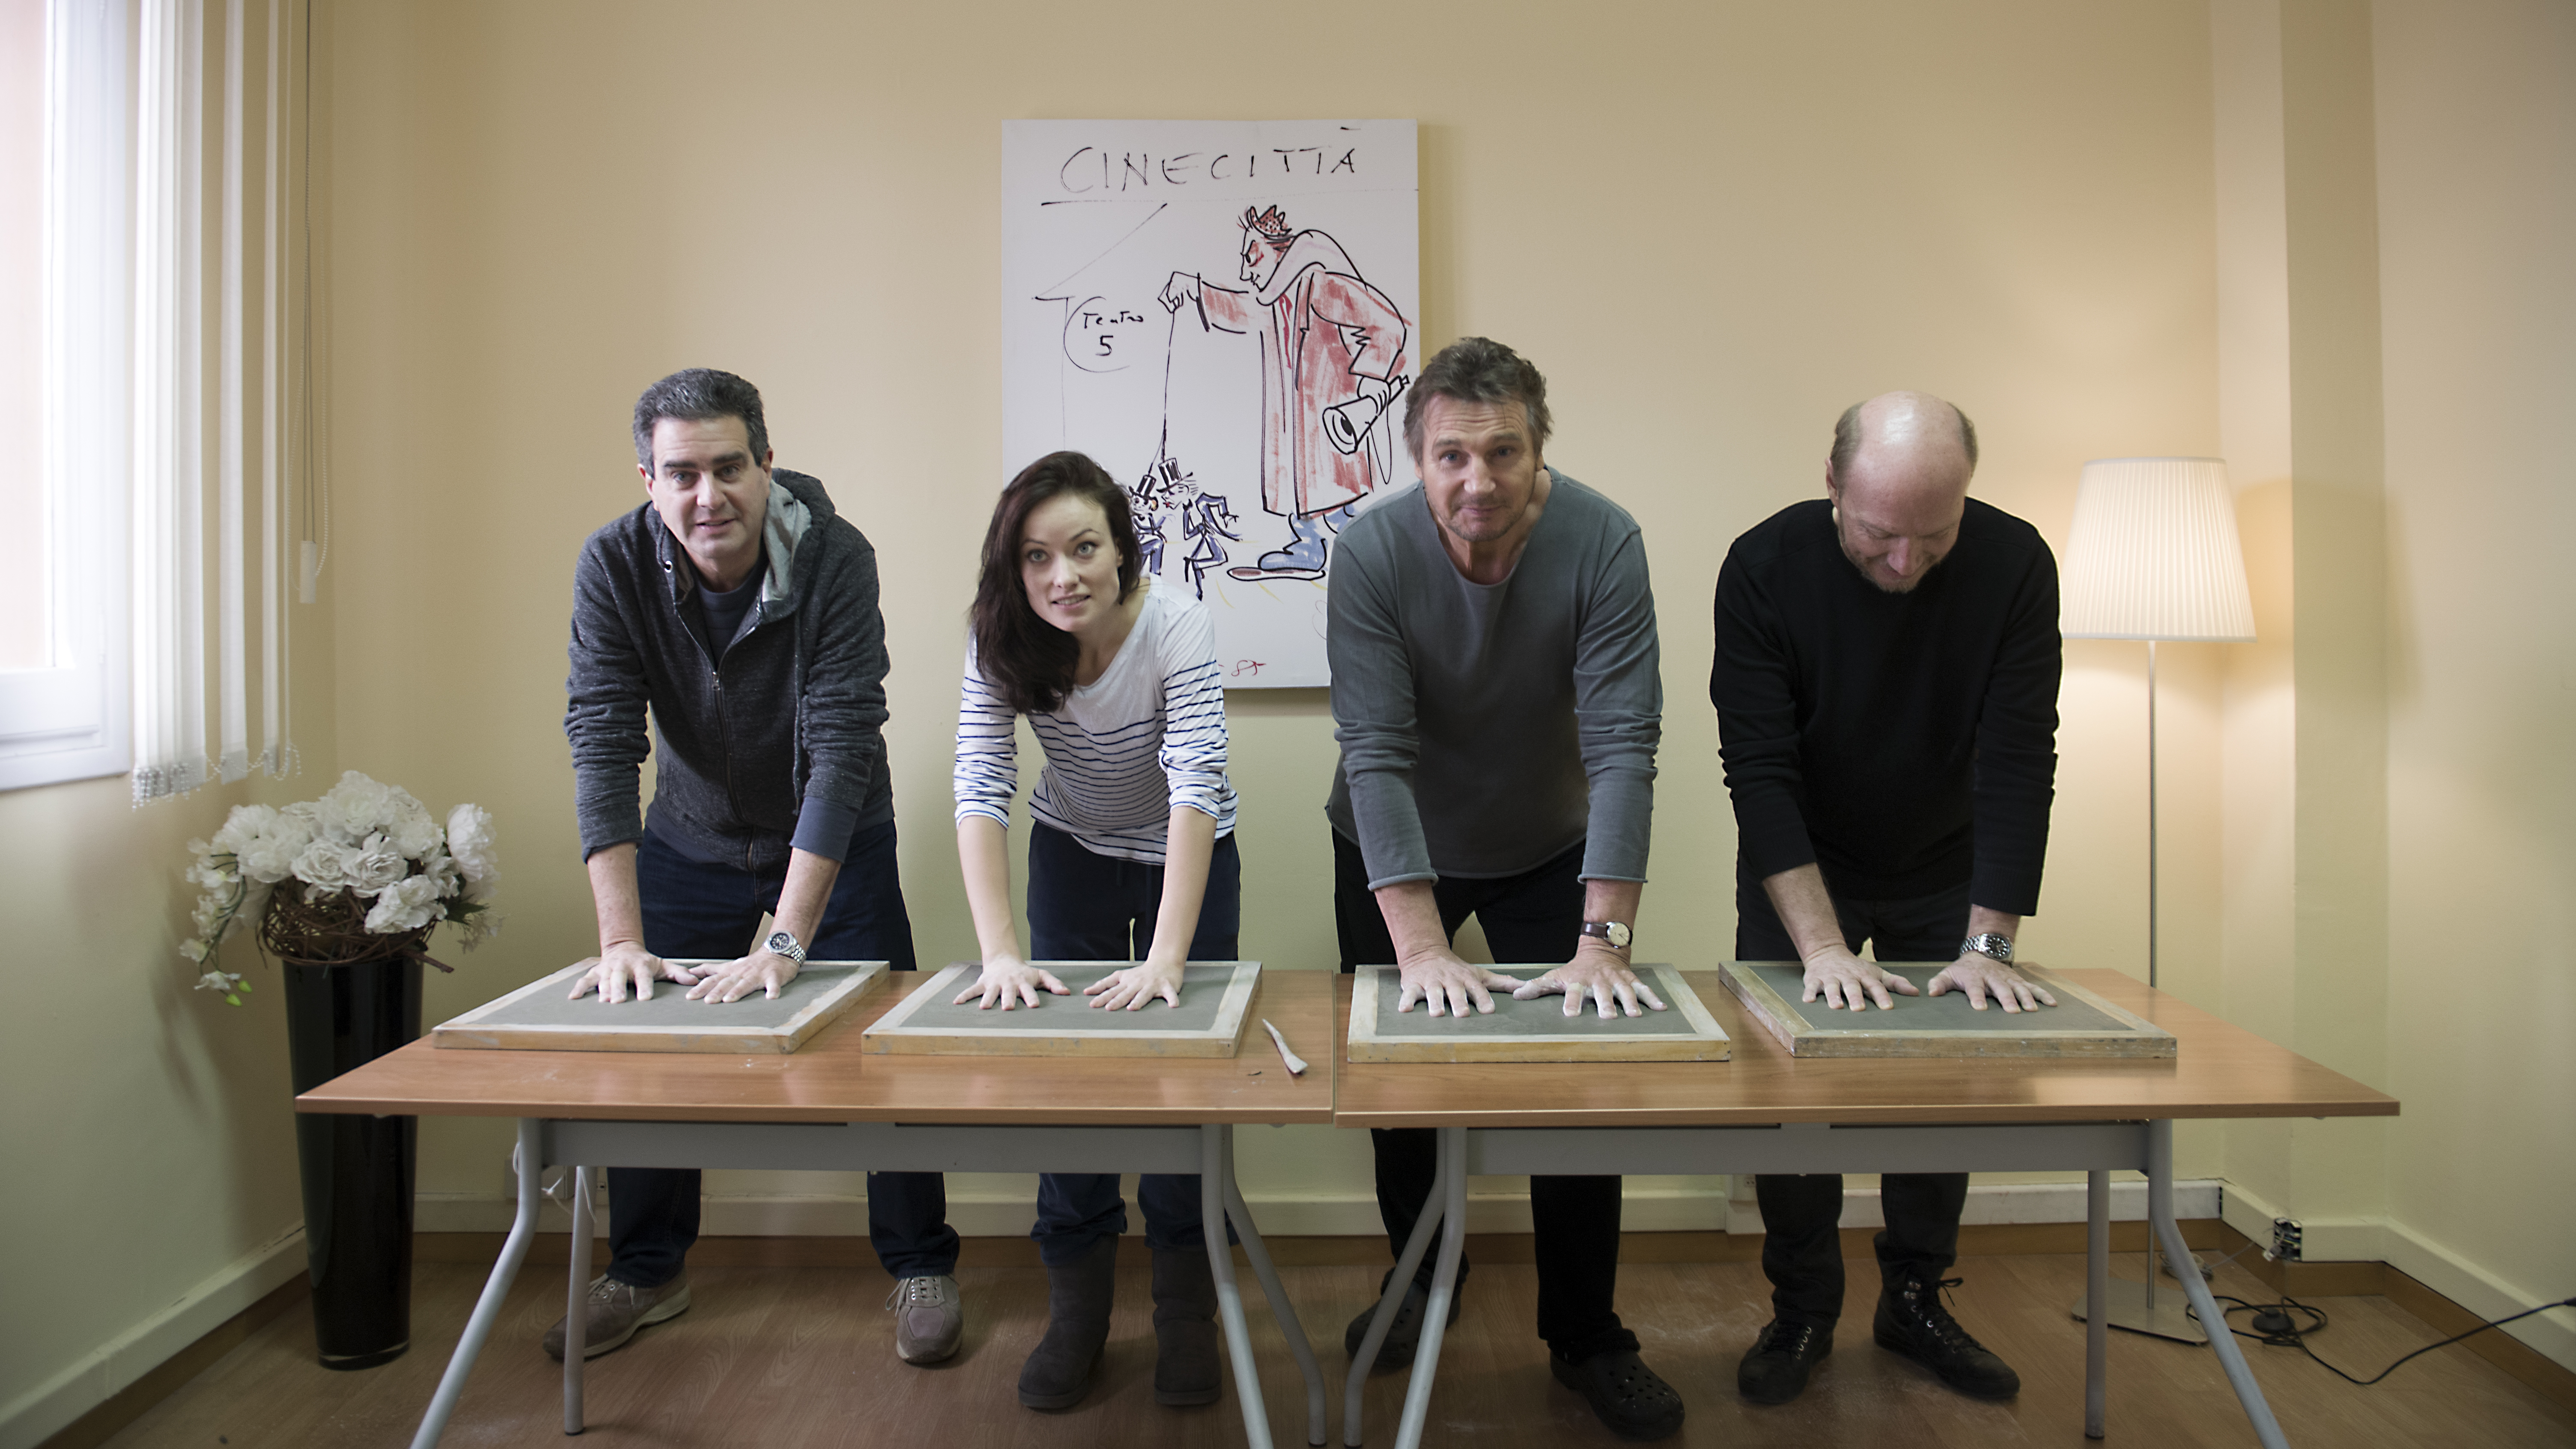 Nozik, Wilde, Neeson and Haggis making hand prints at Cinecitta Studios in Rome following production of Third Person.